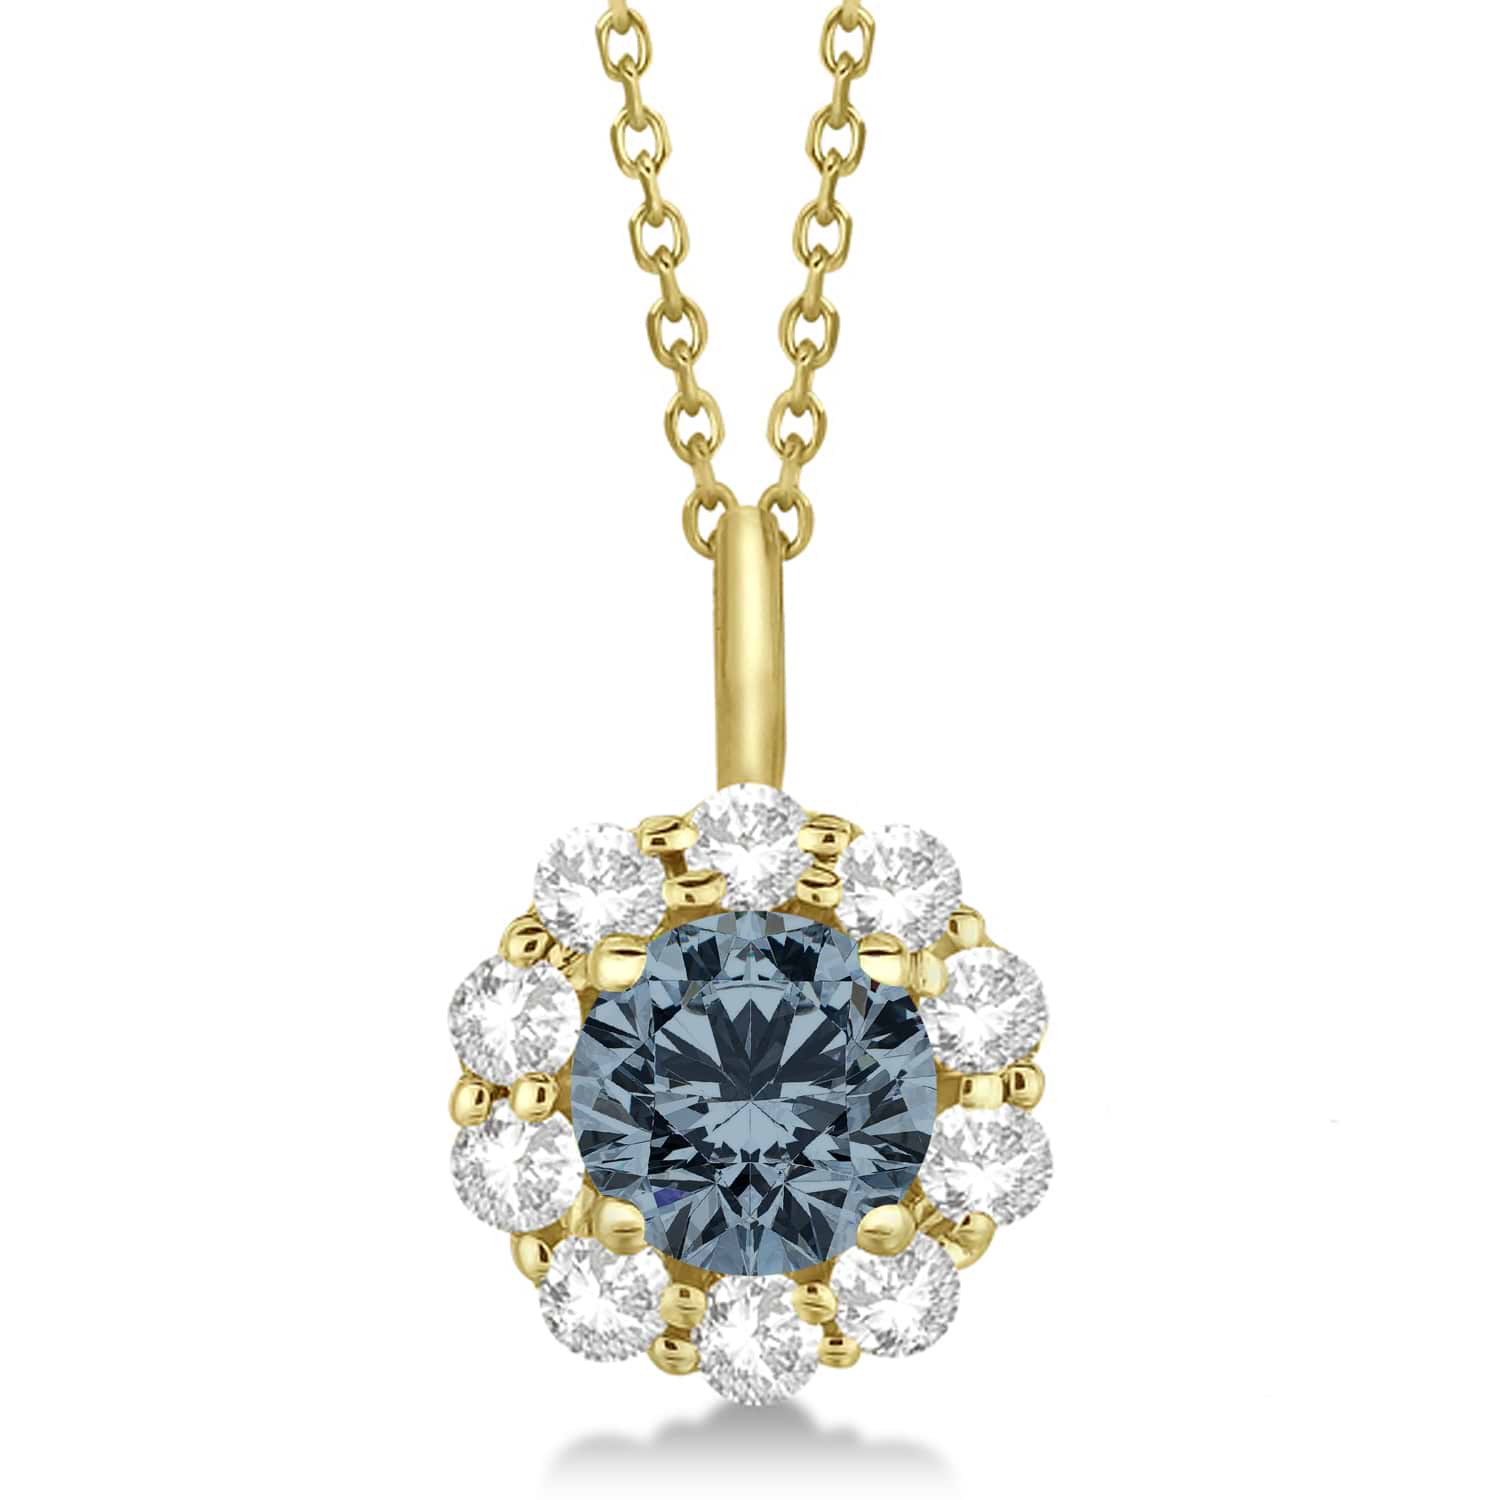 Halo Diamond and Gray Spinel Lady Di Pendant Necklace 18k Yellow Gold (1.69ct)